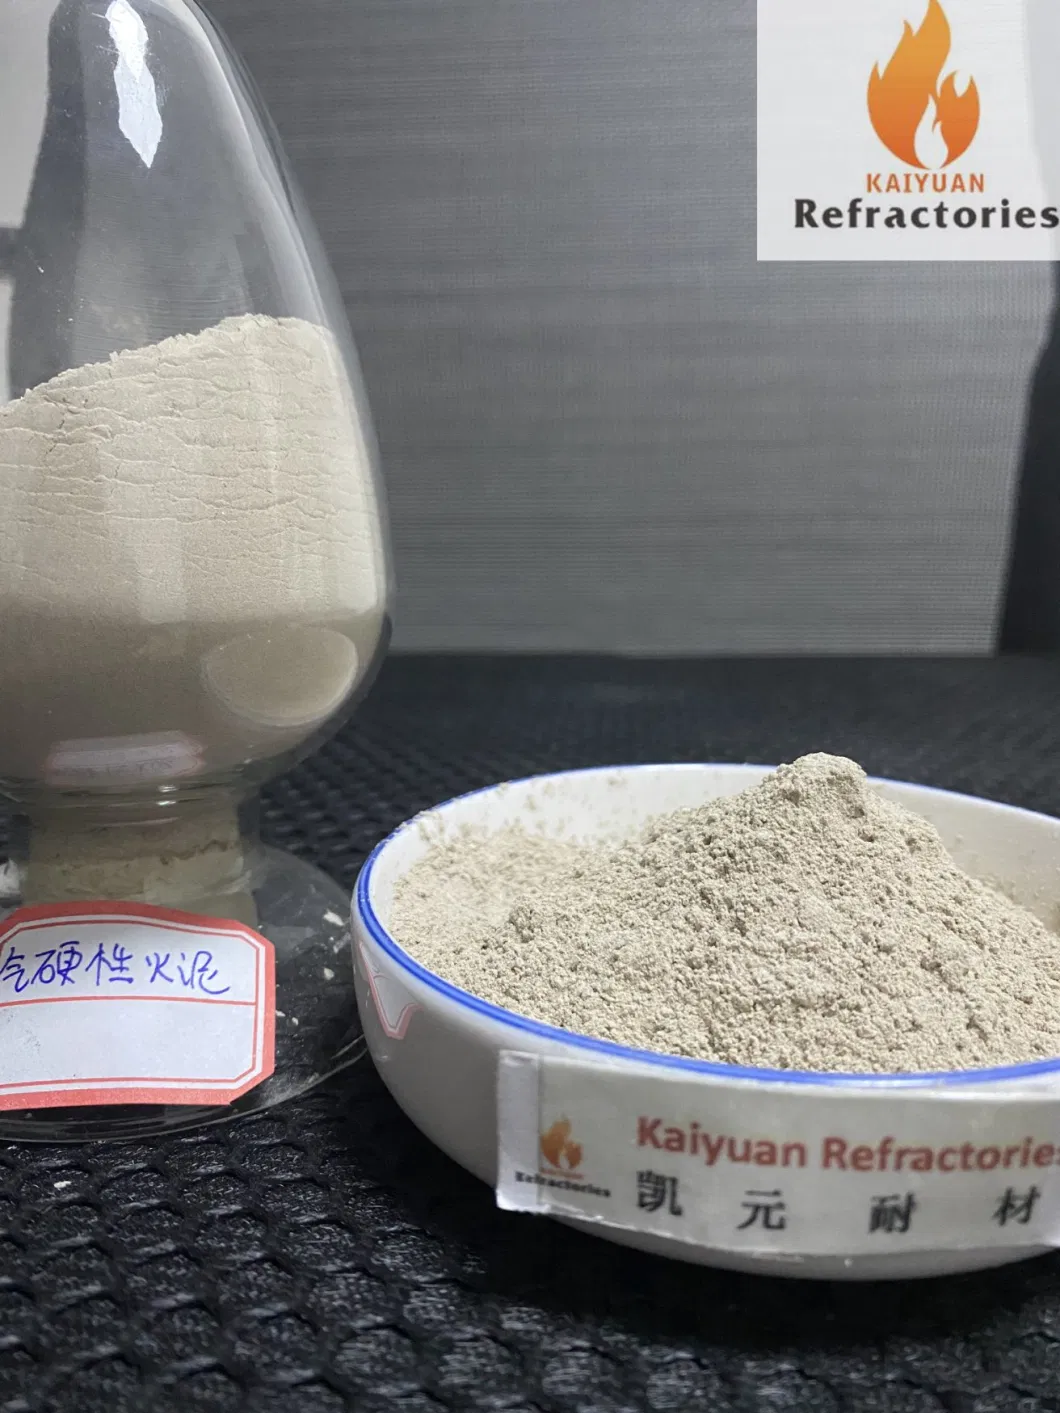 Silicon Carbide Mortar Refractory Mortar Silicon Carbide Refractory Castable Refractory Material Fireproof Material Refractories Monolithic Refractory